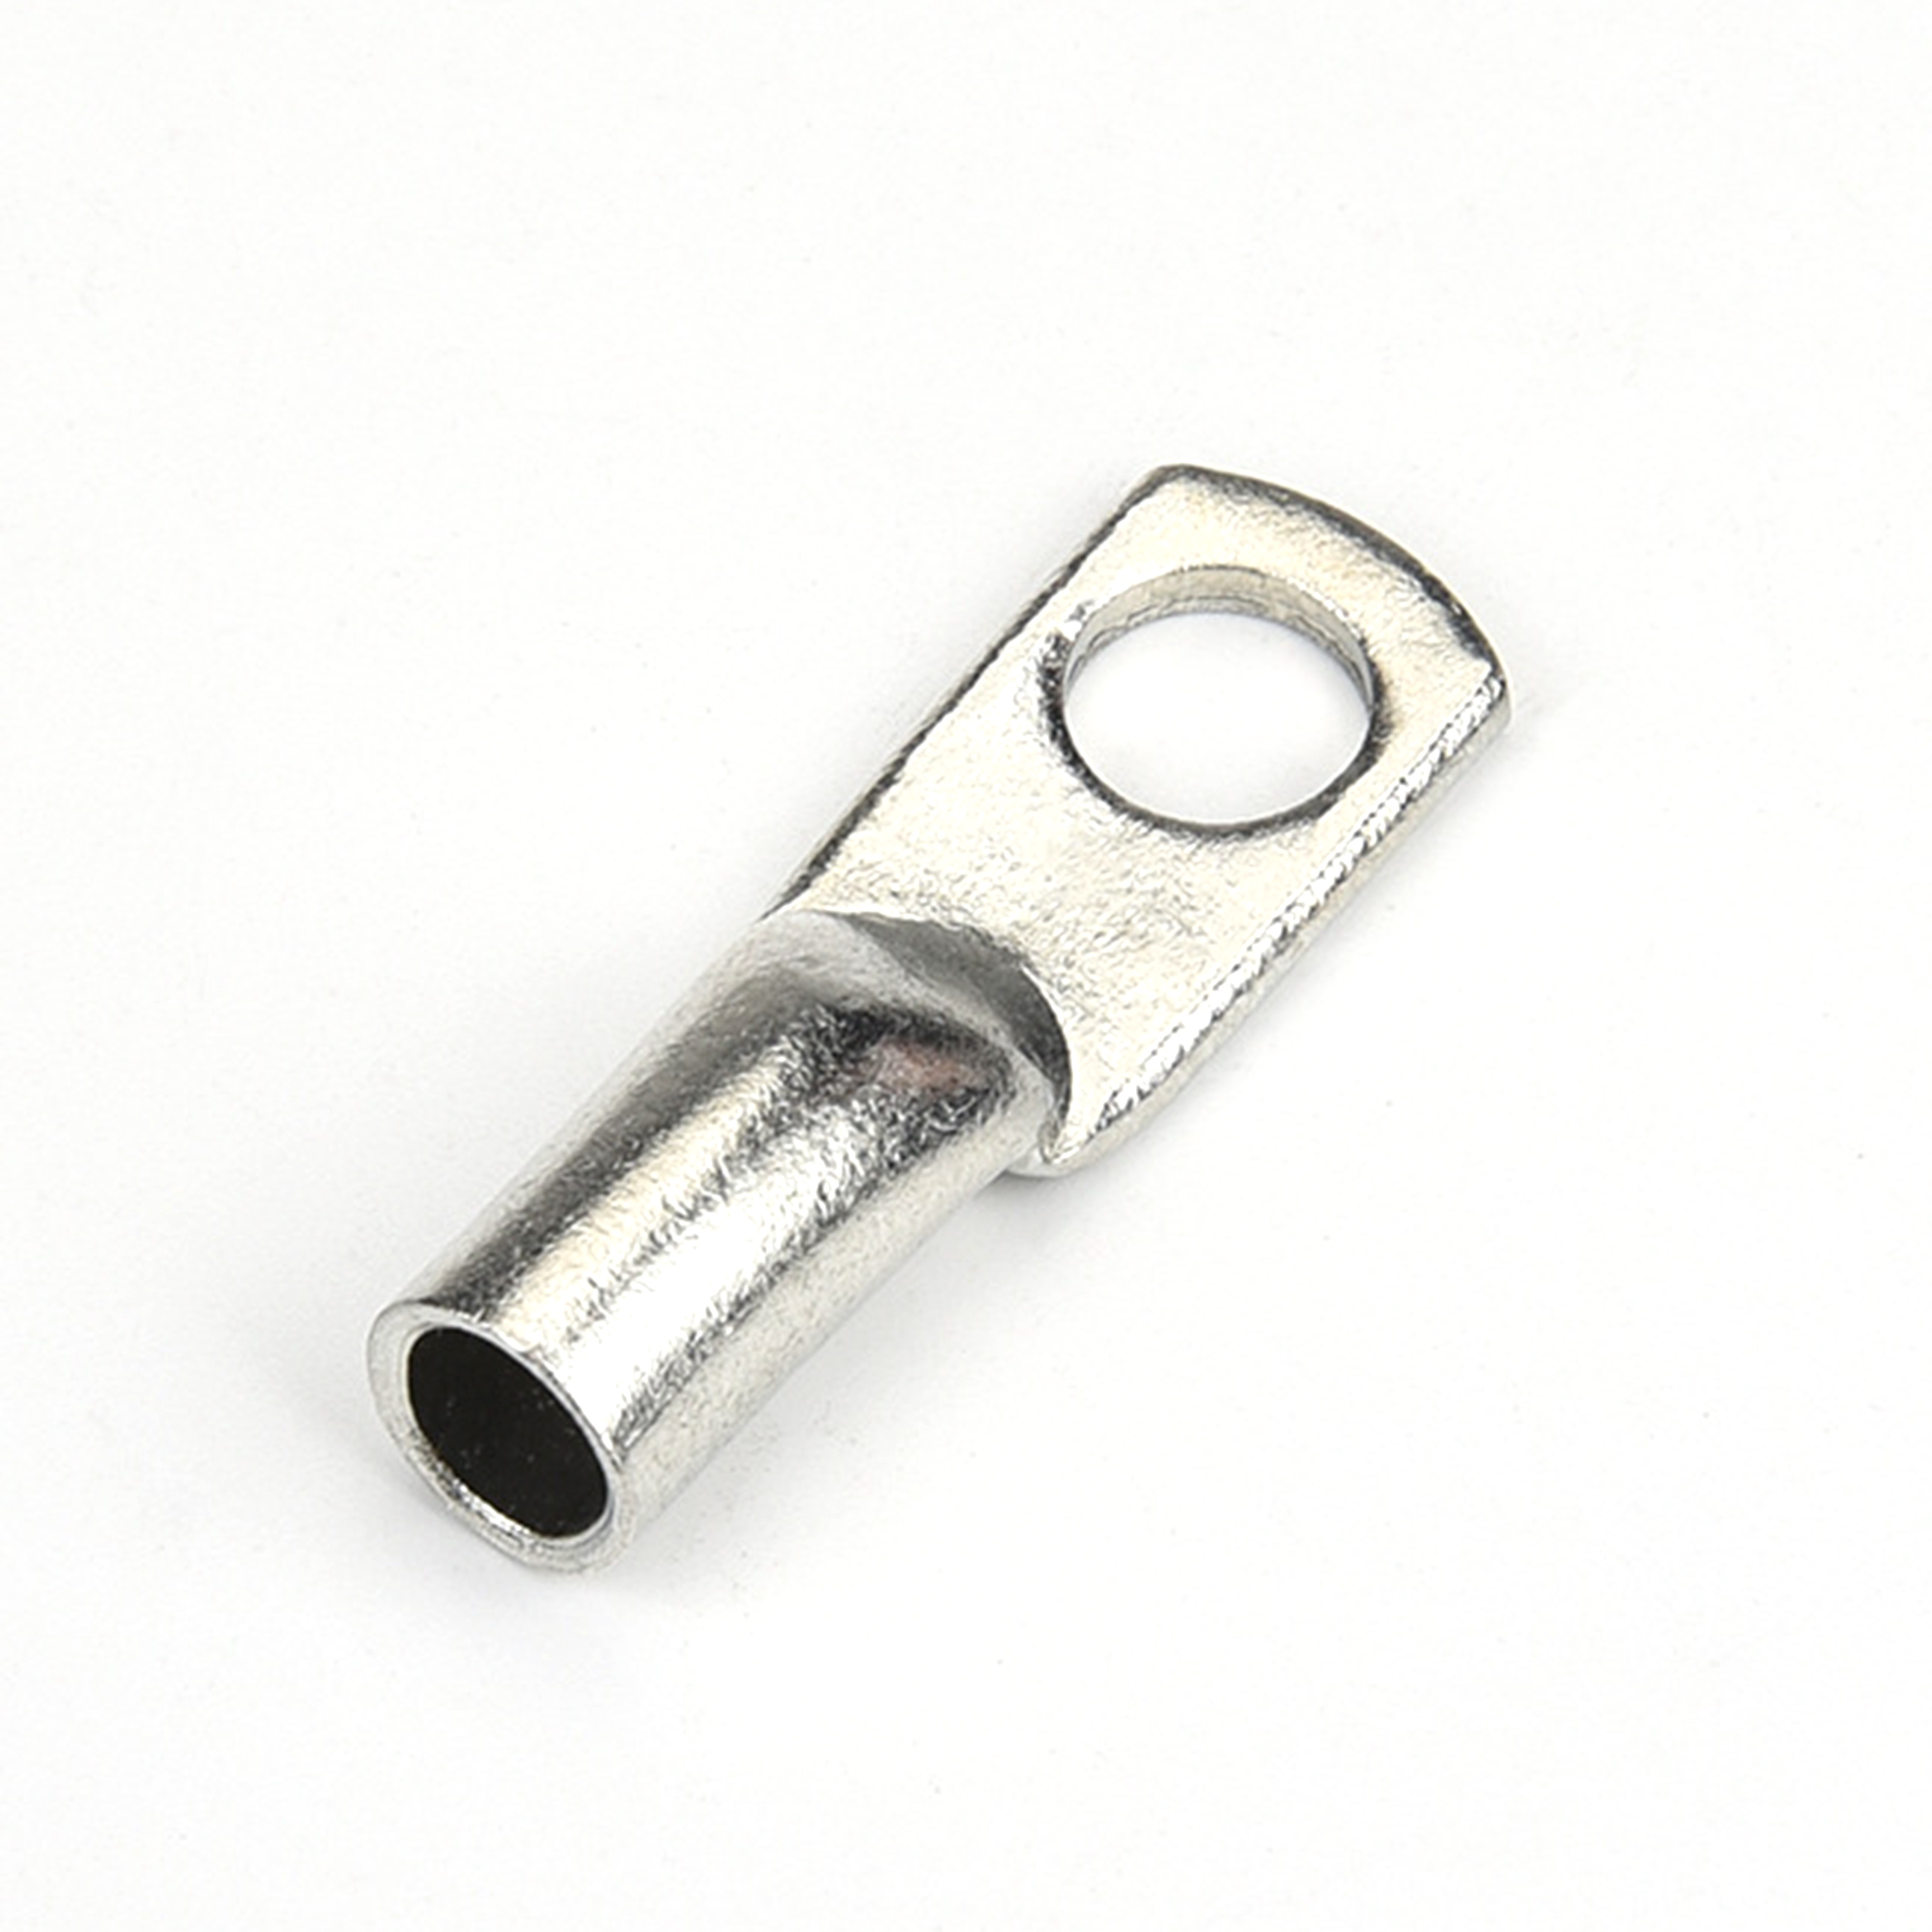 LOW VOLTAGE TIN-PLATED COPPER LUG DTGY